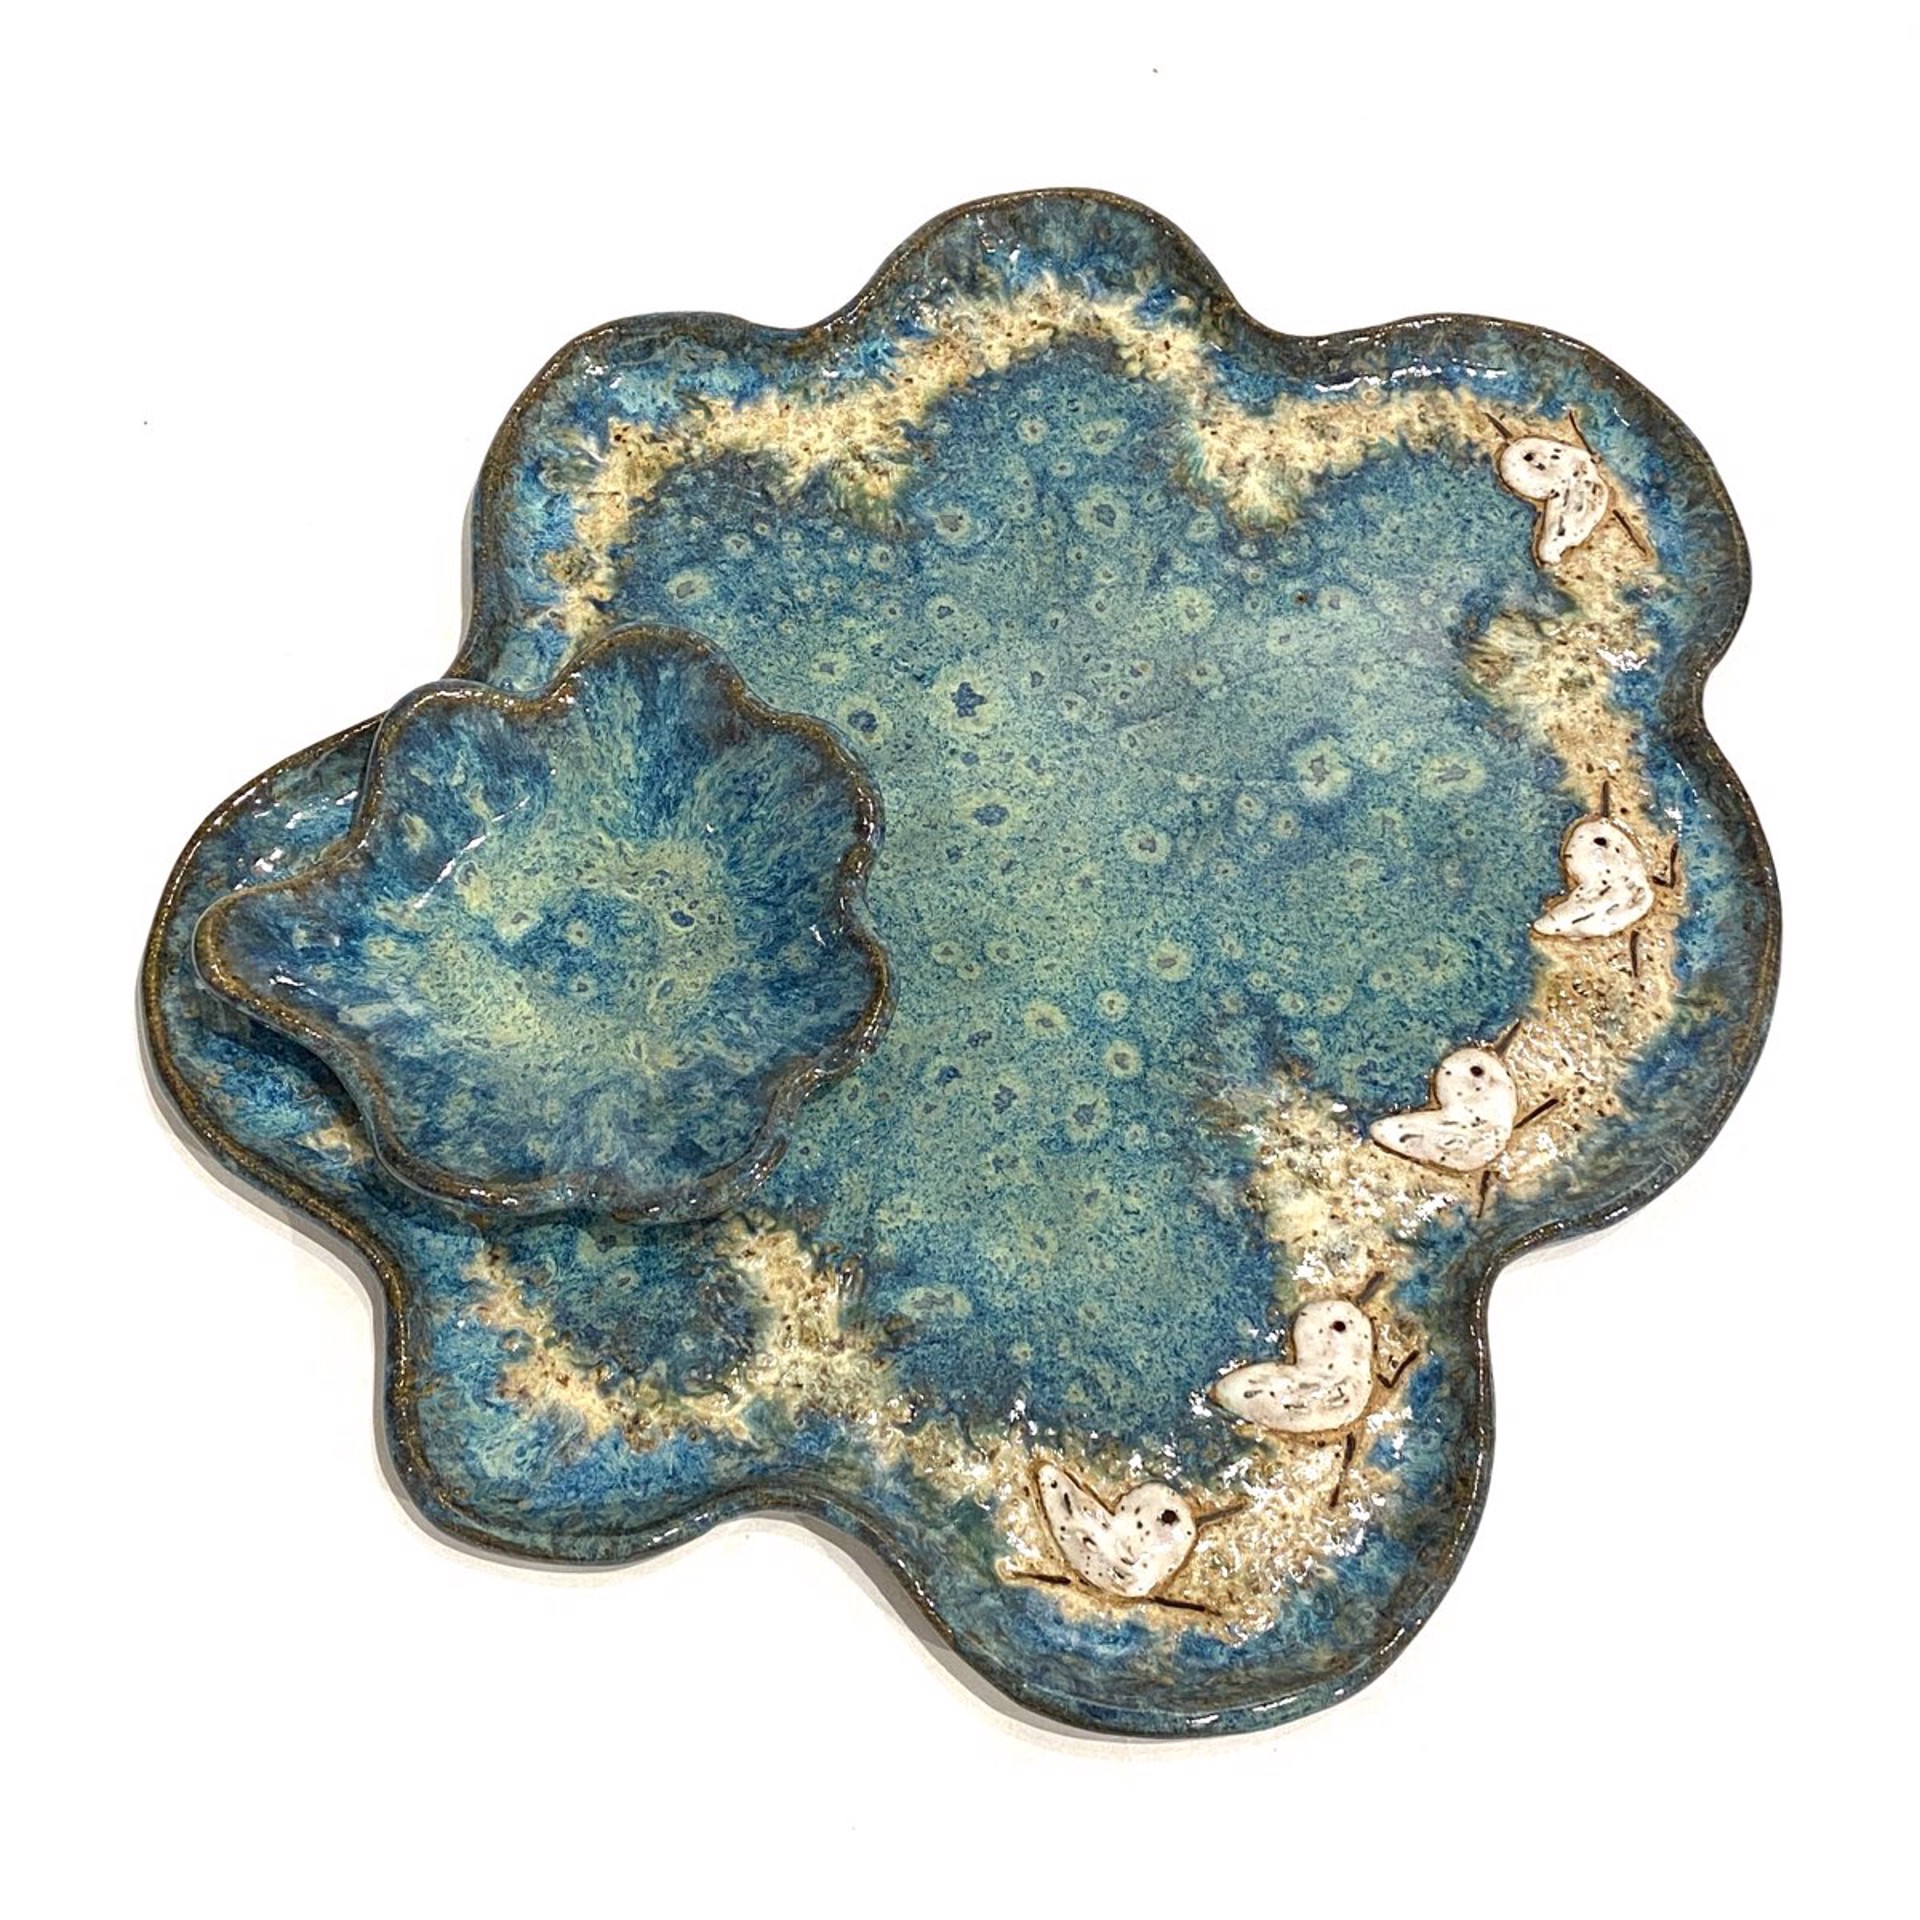 Chip N Dip with Five Sandpipers (Blue Glaze) LG23-991 by Jim & Steffi Logan